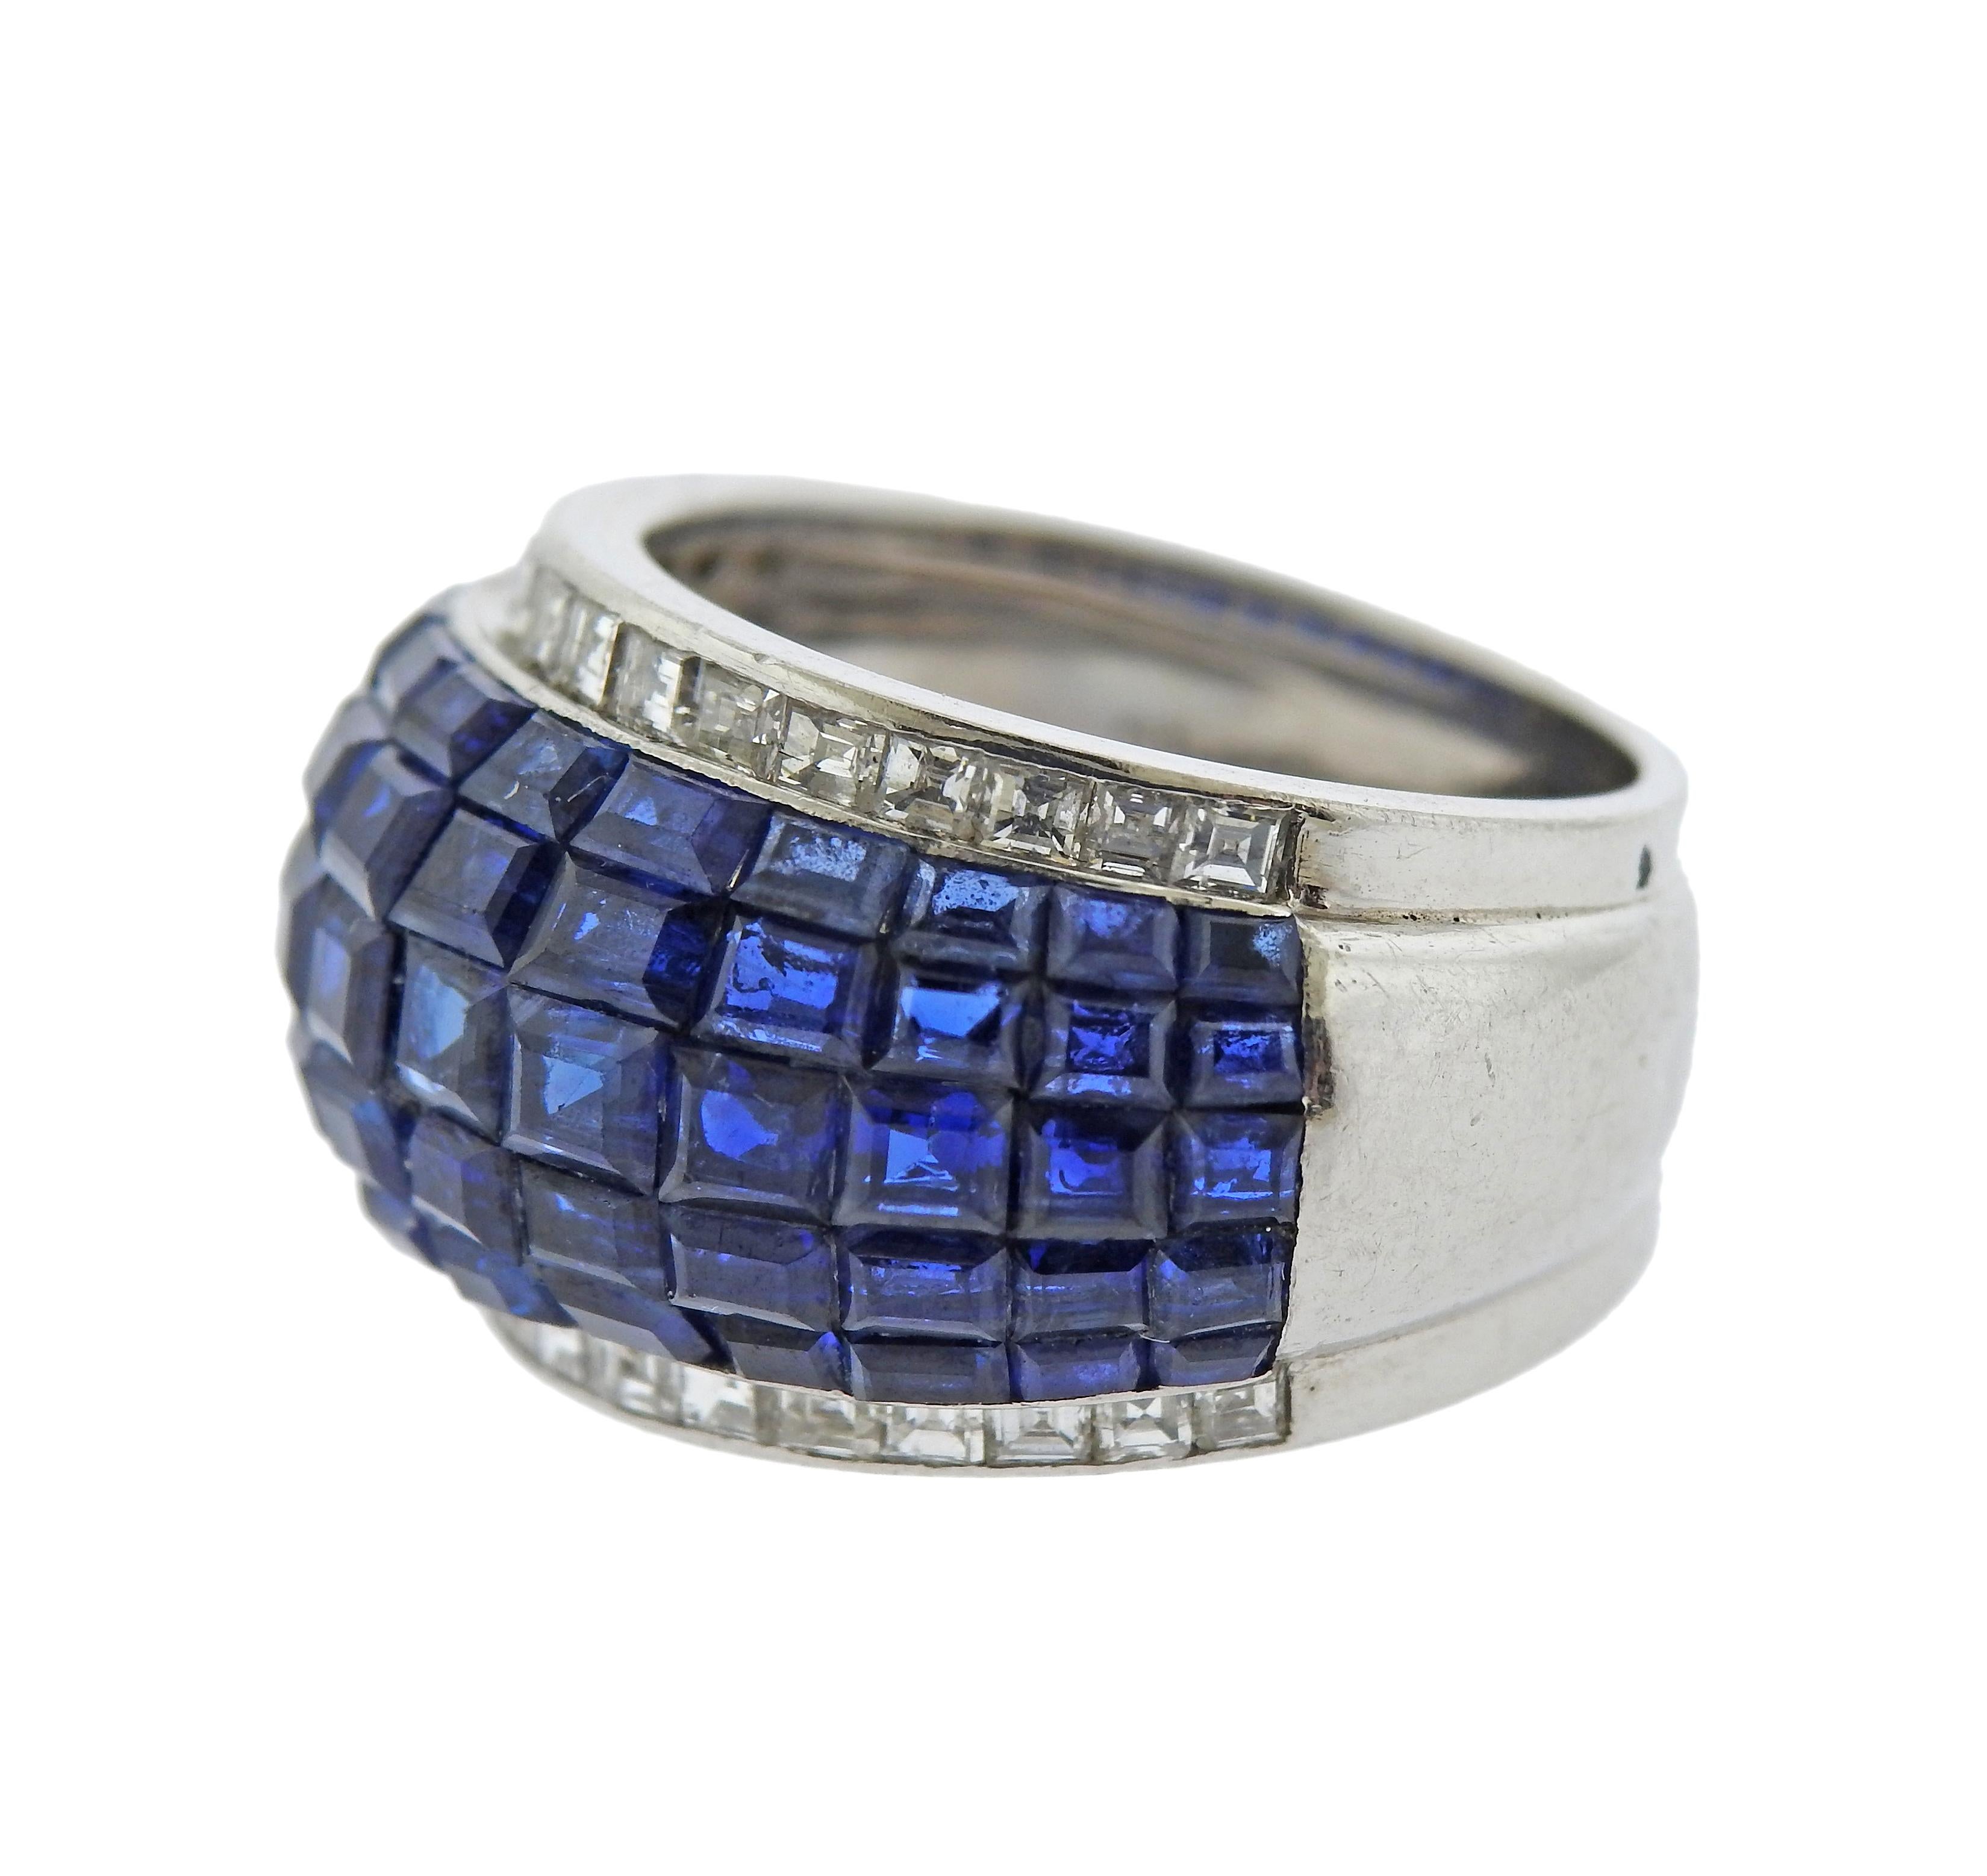 French made, platinum dome ring, featuring invisible set blue sapphires and approx. 0.60ctw in diamonds. Ring size - 6, ring top is 14mm wide. Marked: PT950, SC. Weight - 12 grams.